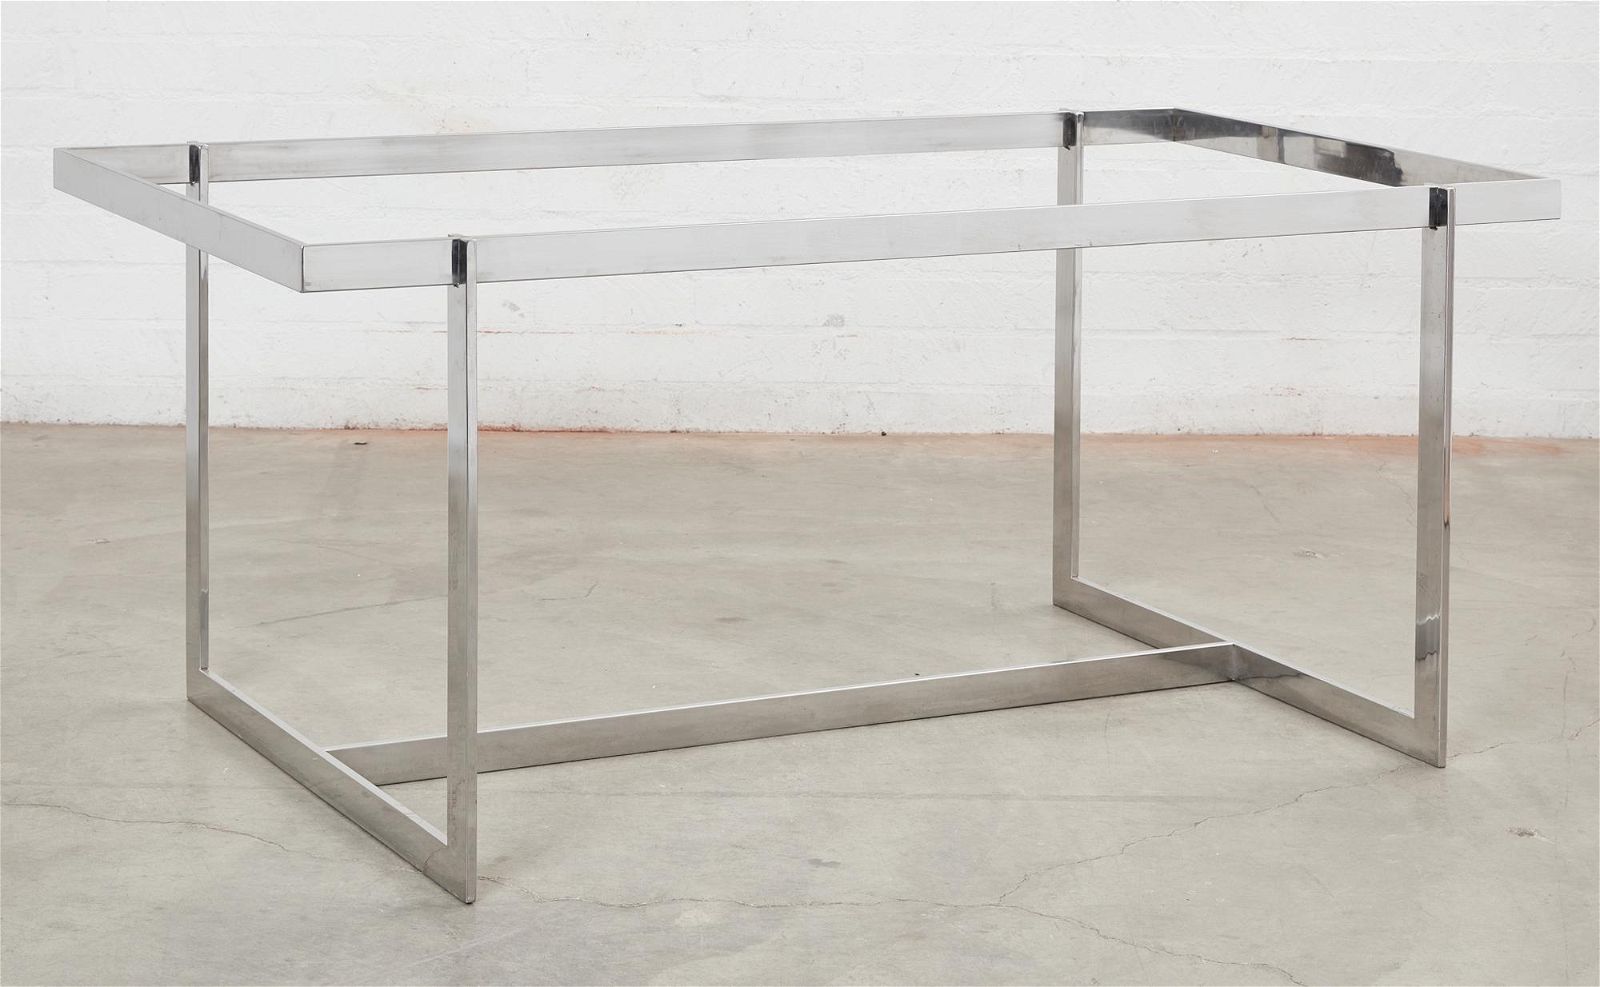 A MODERNIST STAINLESS STEEL TABLE 2fb2750